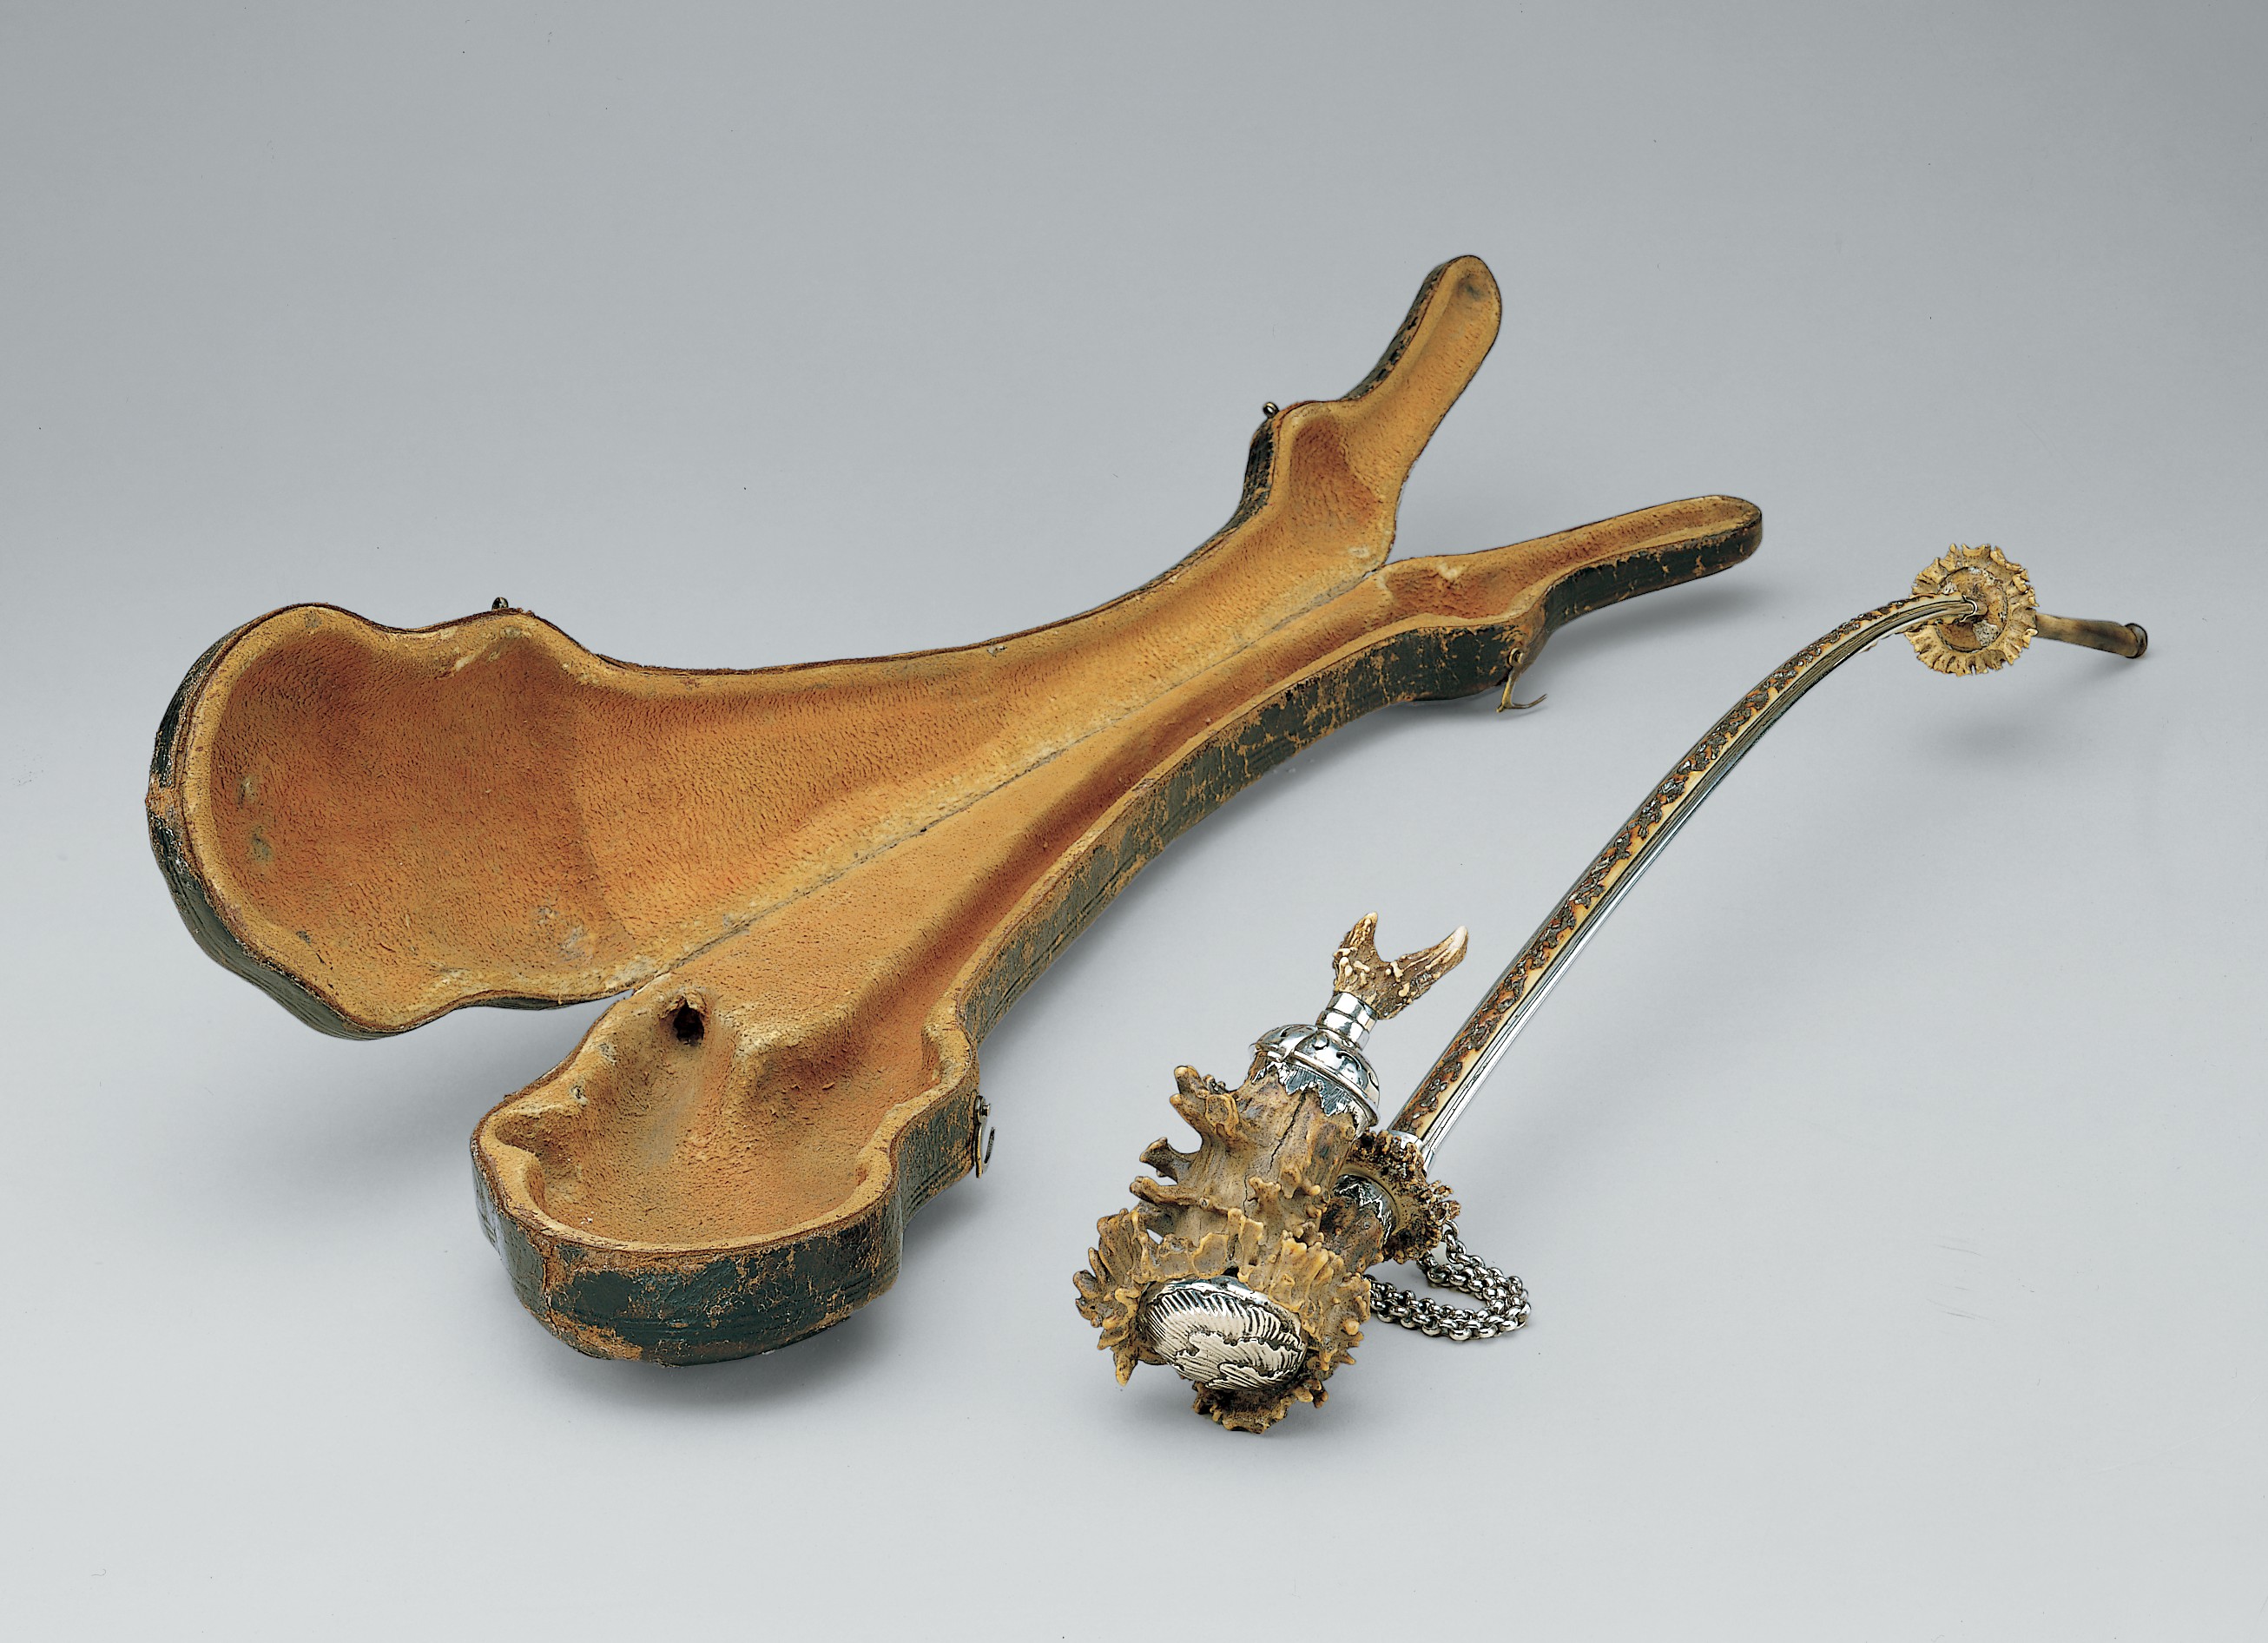 Tobacco pipe with case - Southern German - The Metropolitan Museum of Art